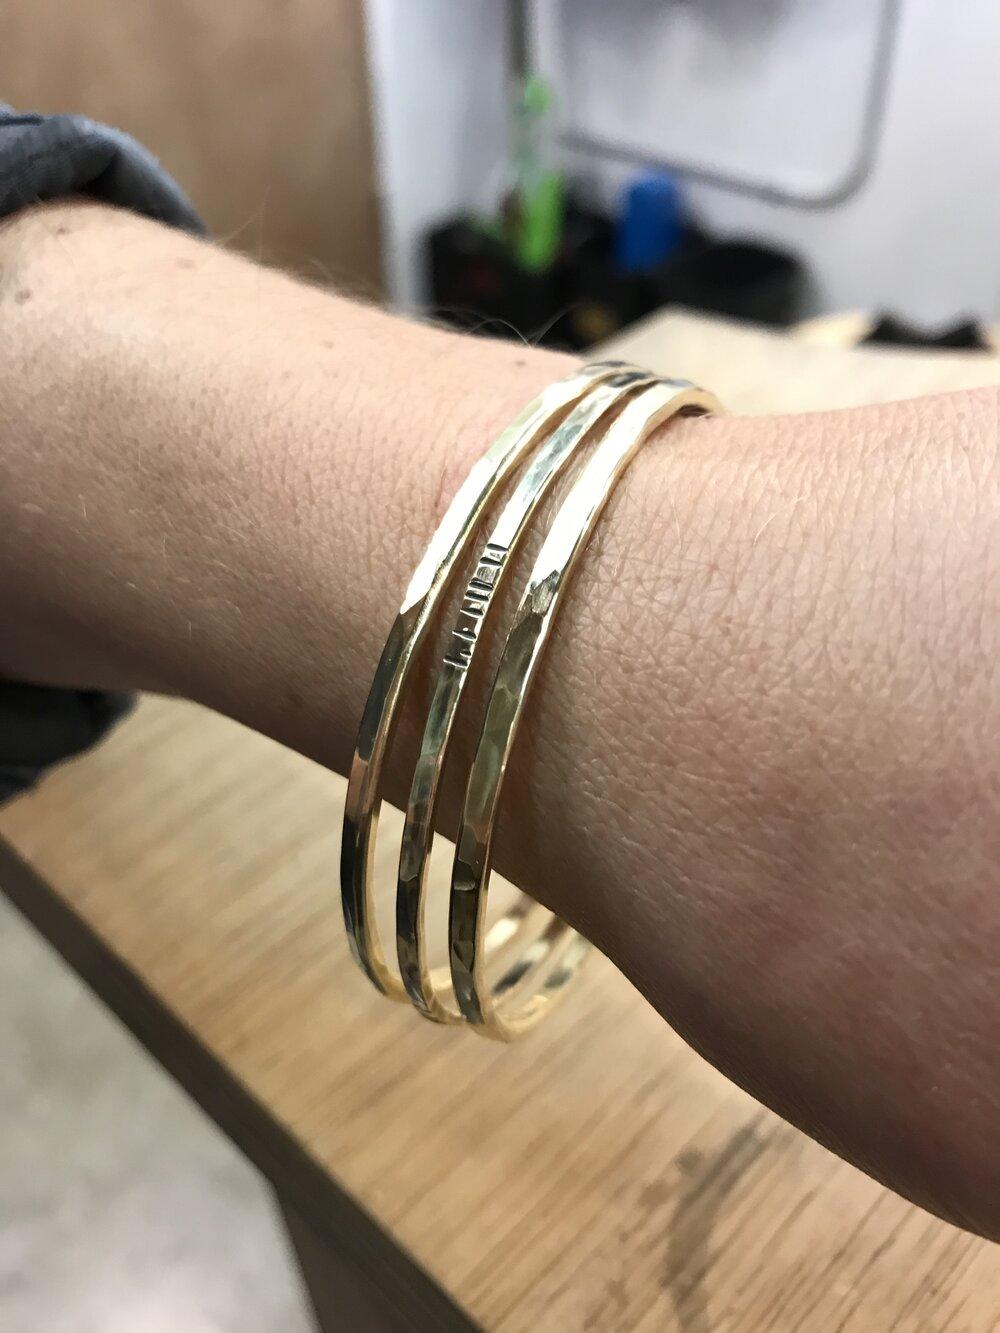 Hammered Bangles and Cuffs - 3.5 hours